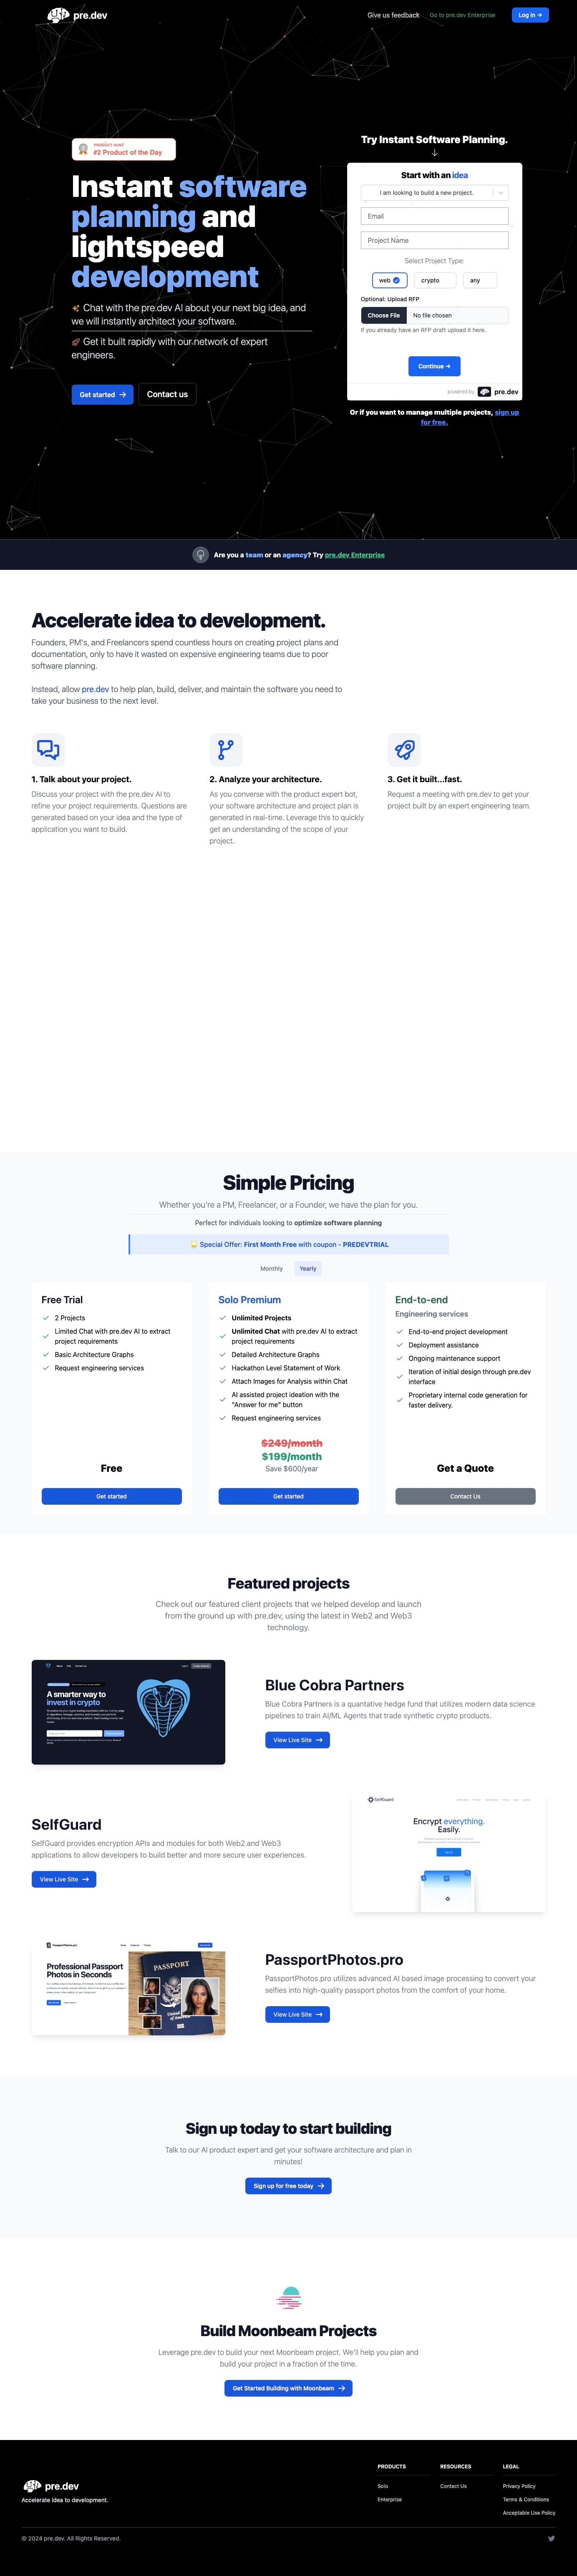 10 Beautiful SaaS Landing Pages Without Product Images